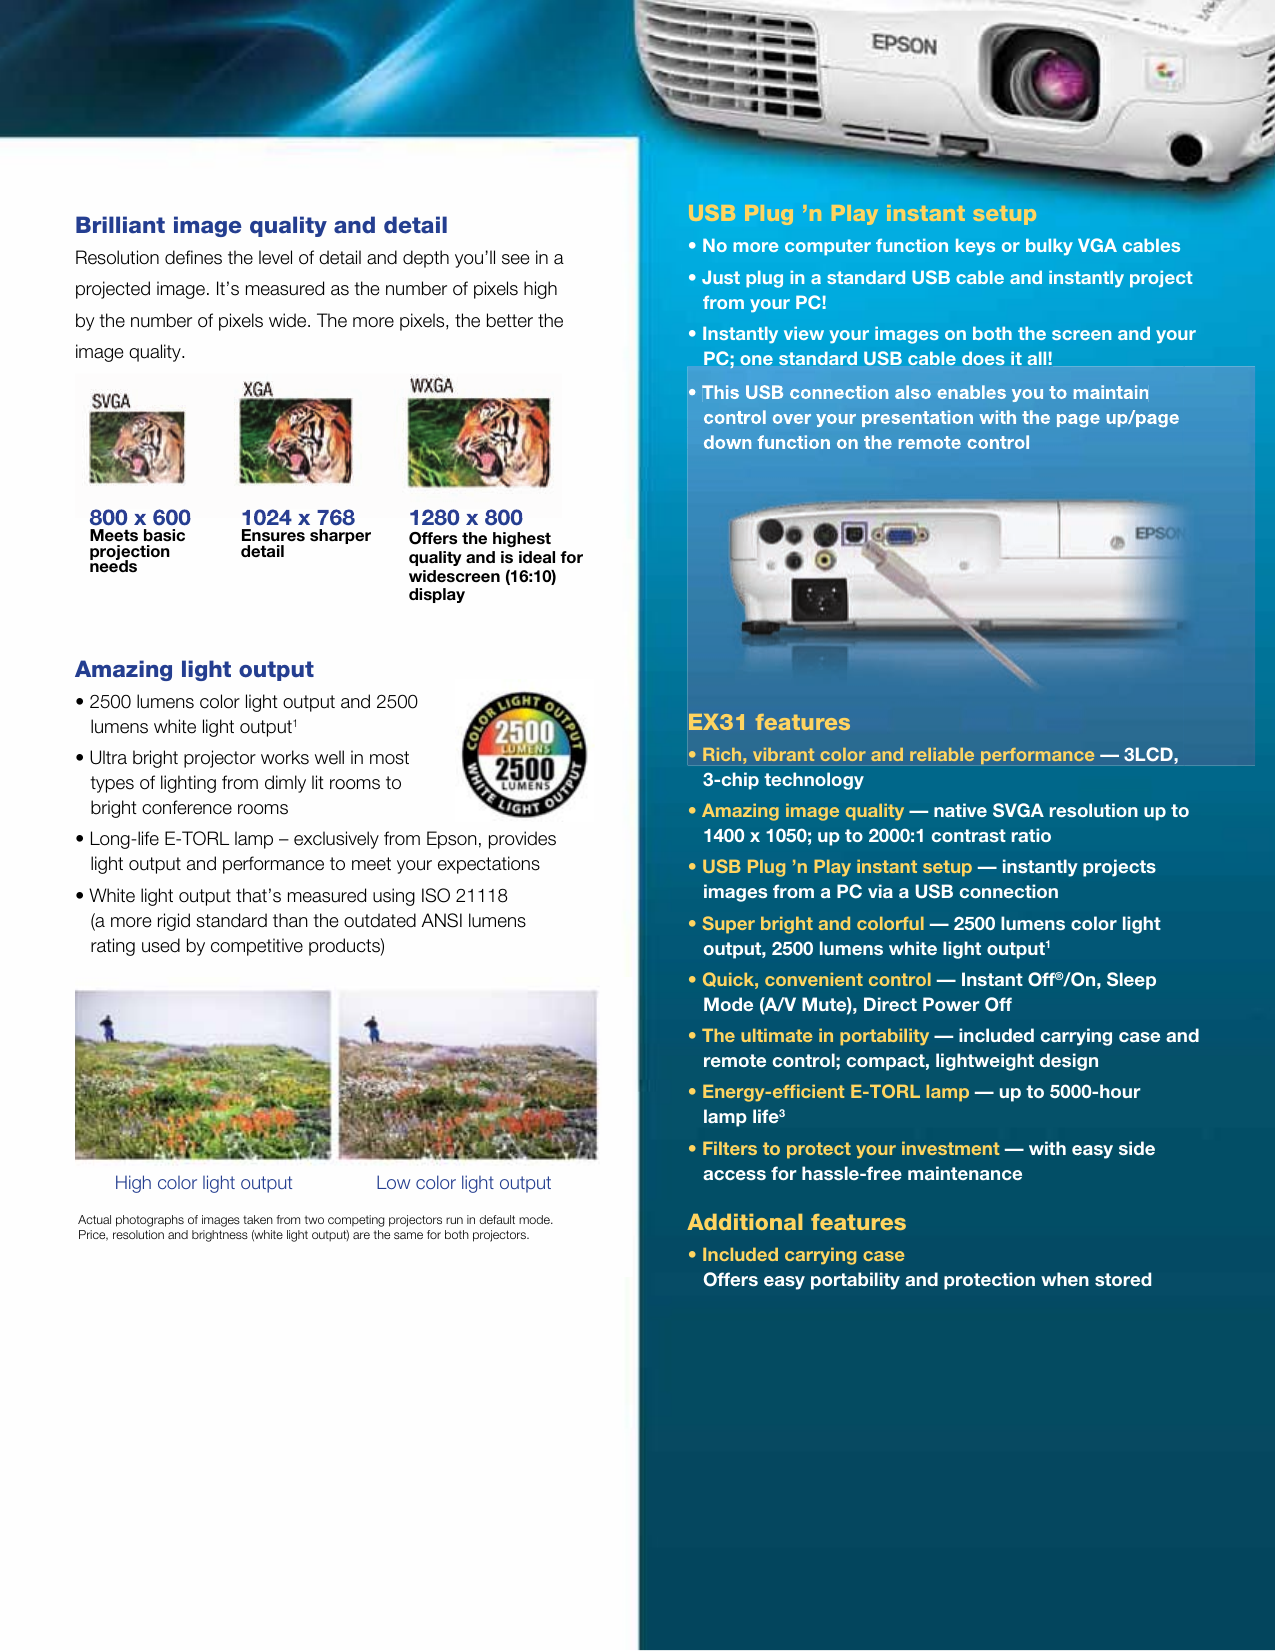 Page 3 of 4 - Epson Epson-Ex31-Multimedia-Projector-Product-Brochure- EX31 - Product Brochure  Epson-ex31-multimedia-projector-product-brochure